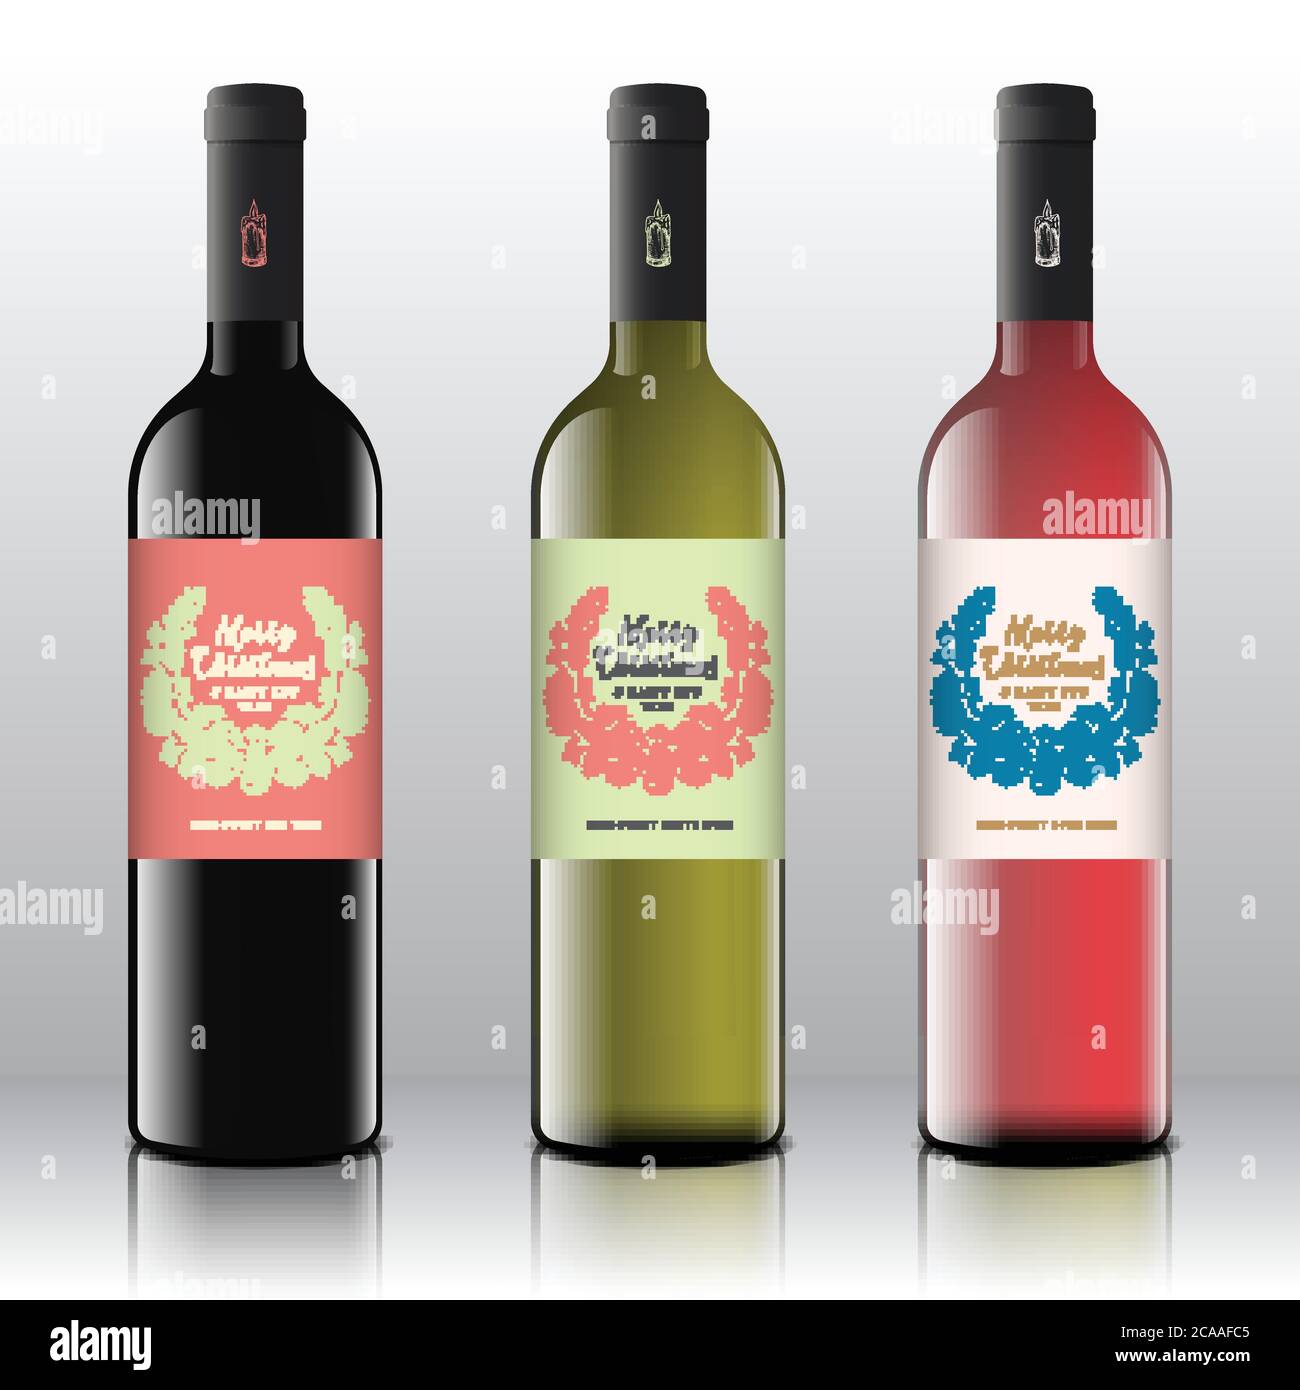 Christmas Greetings Wine Bottle Labels Concept. Red, White and Throughout Template For Wine Bottle Labels